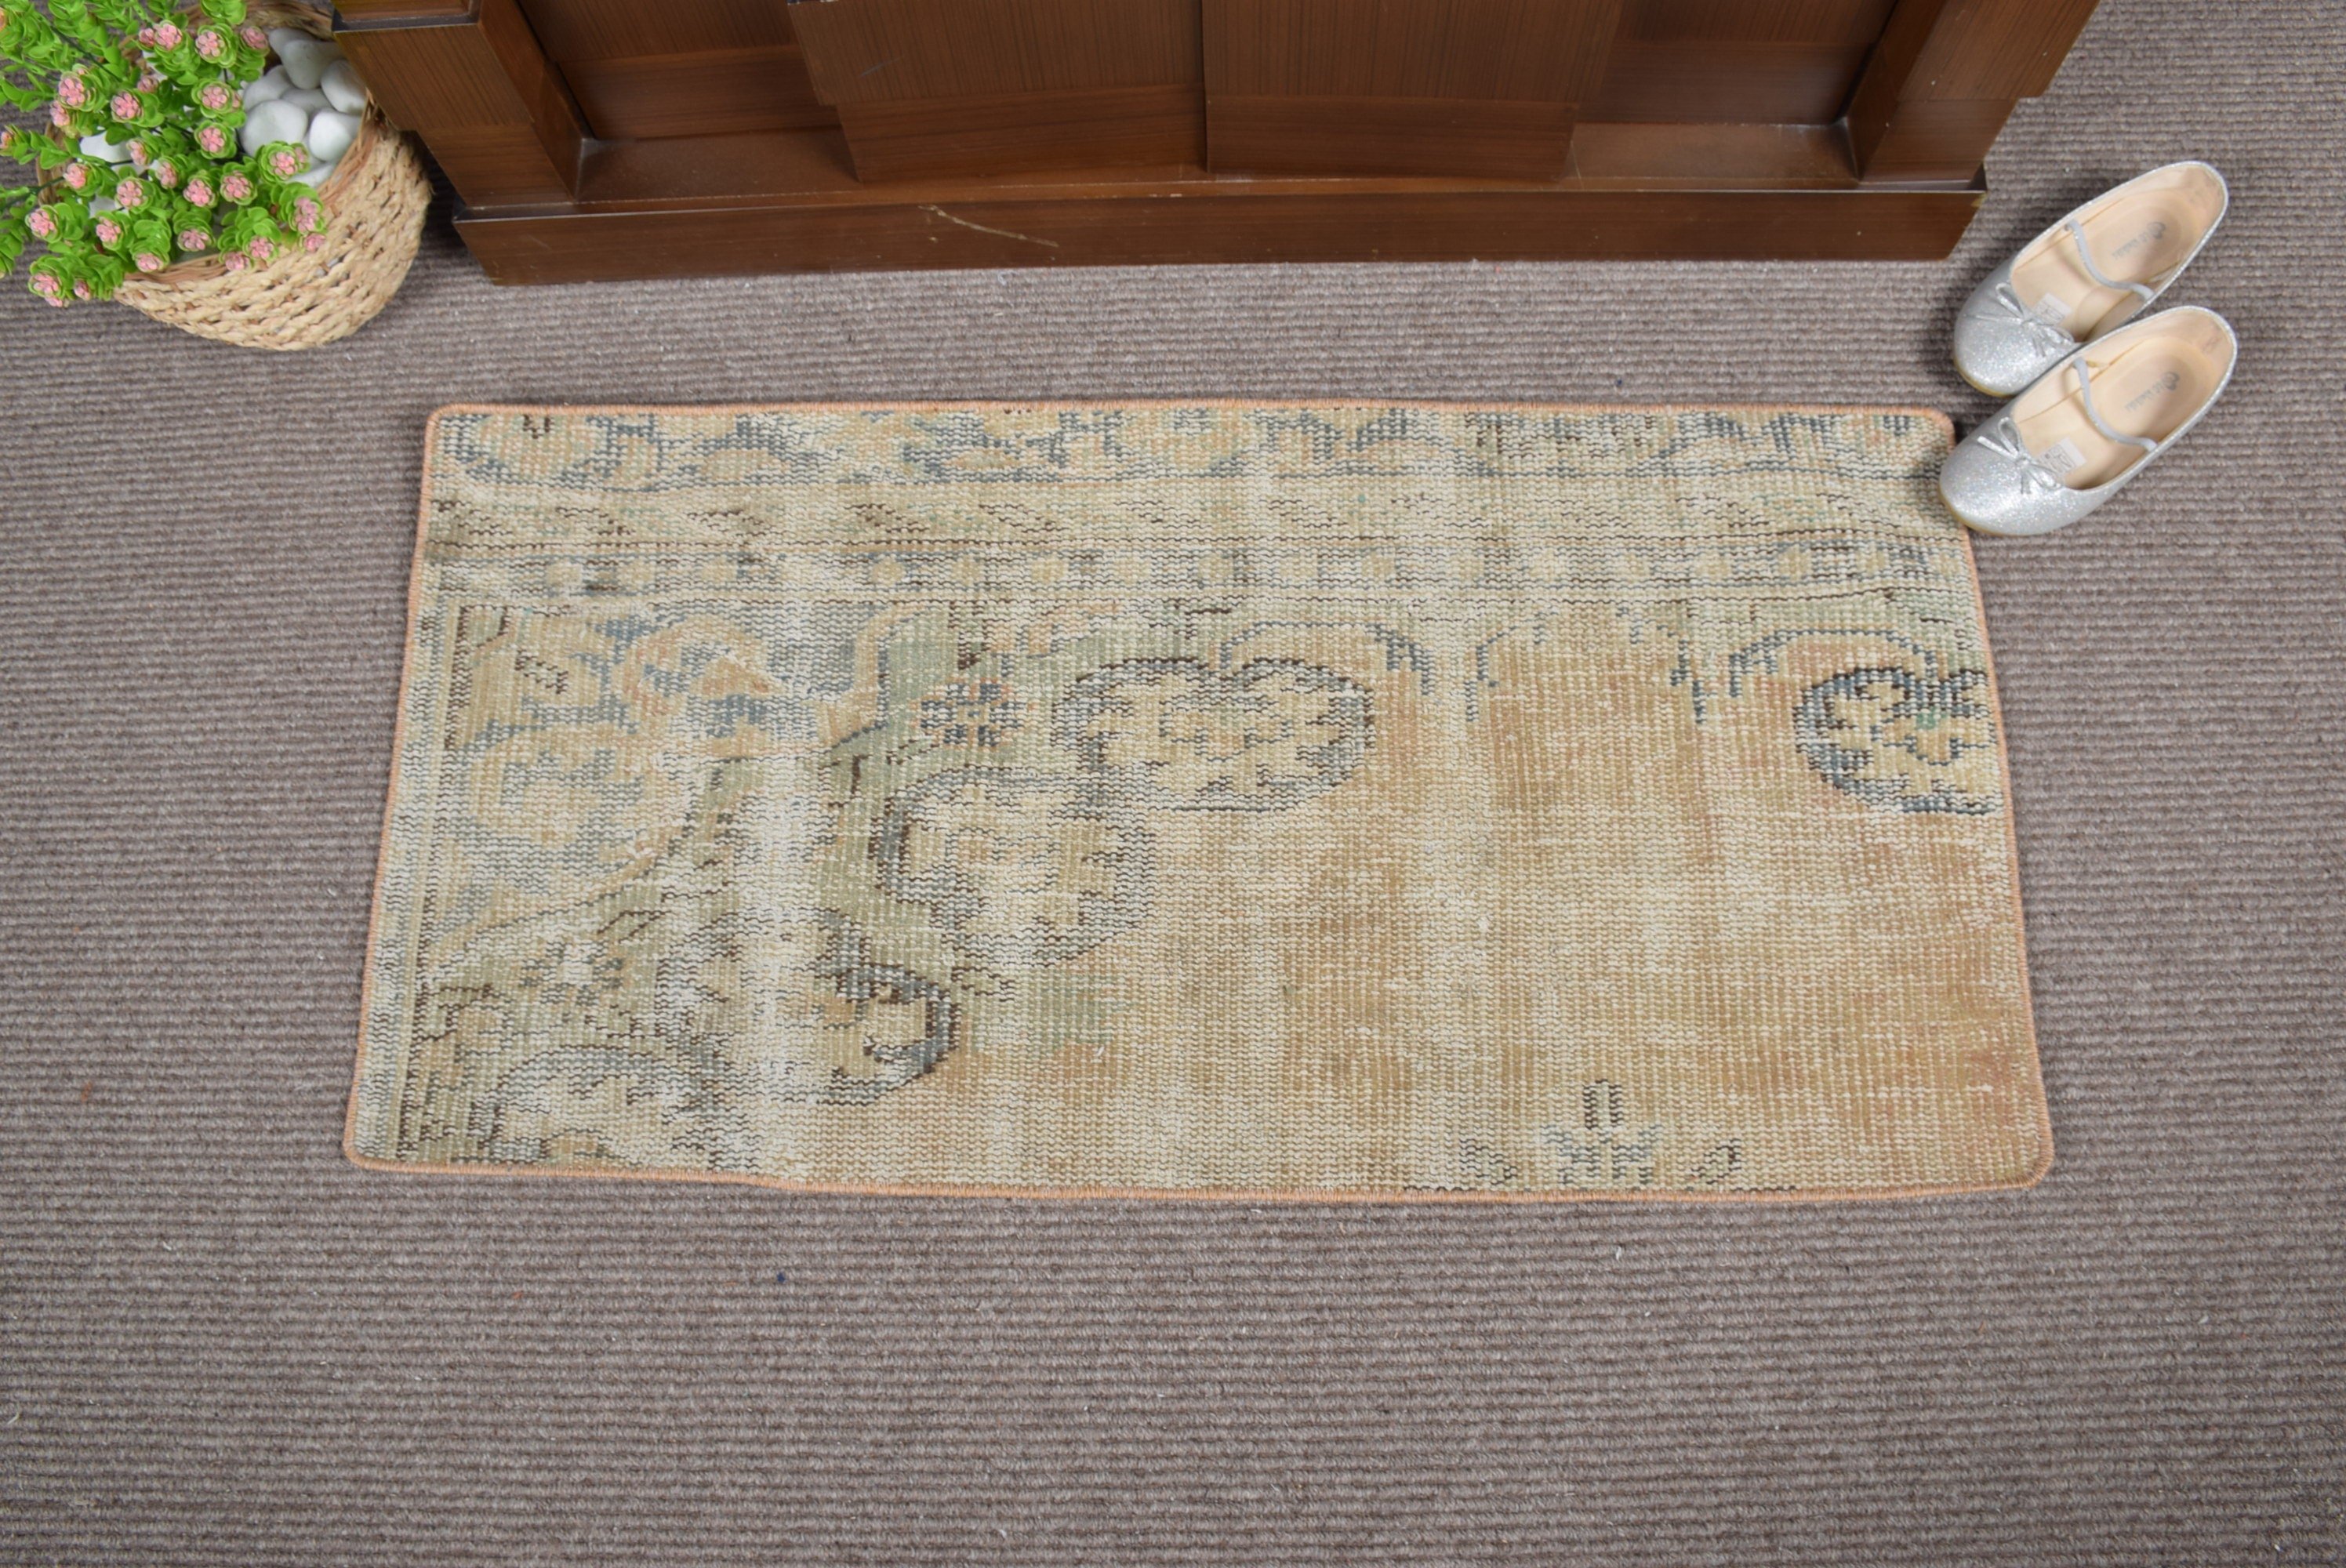 1.6x3.3 ft Small Rug, Cool Rug, Kitchen Rugs, Beige Home Decor Rugs, Turkish Rug, Bedroom Rugs, Rugs for Entry, Vintage Rug